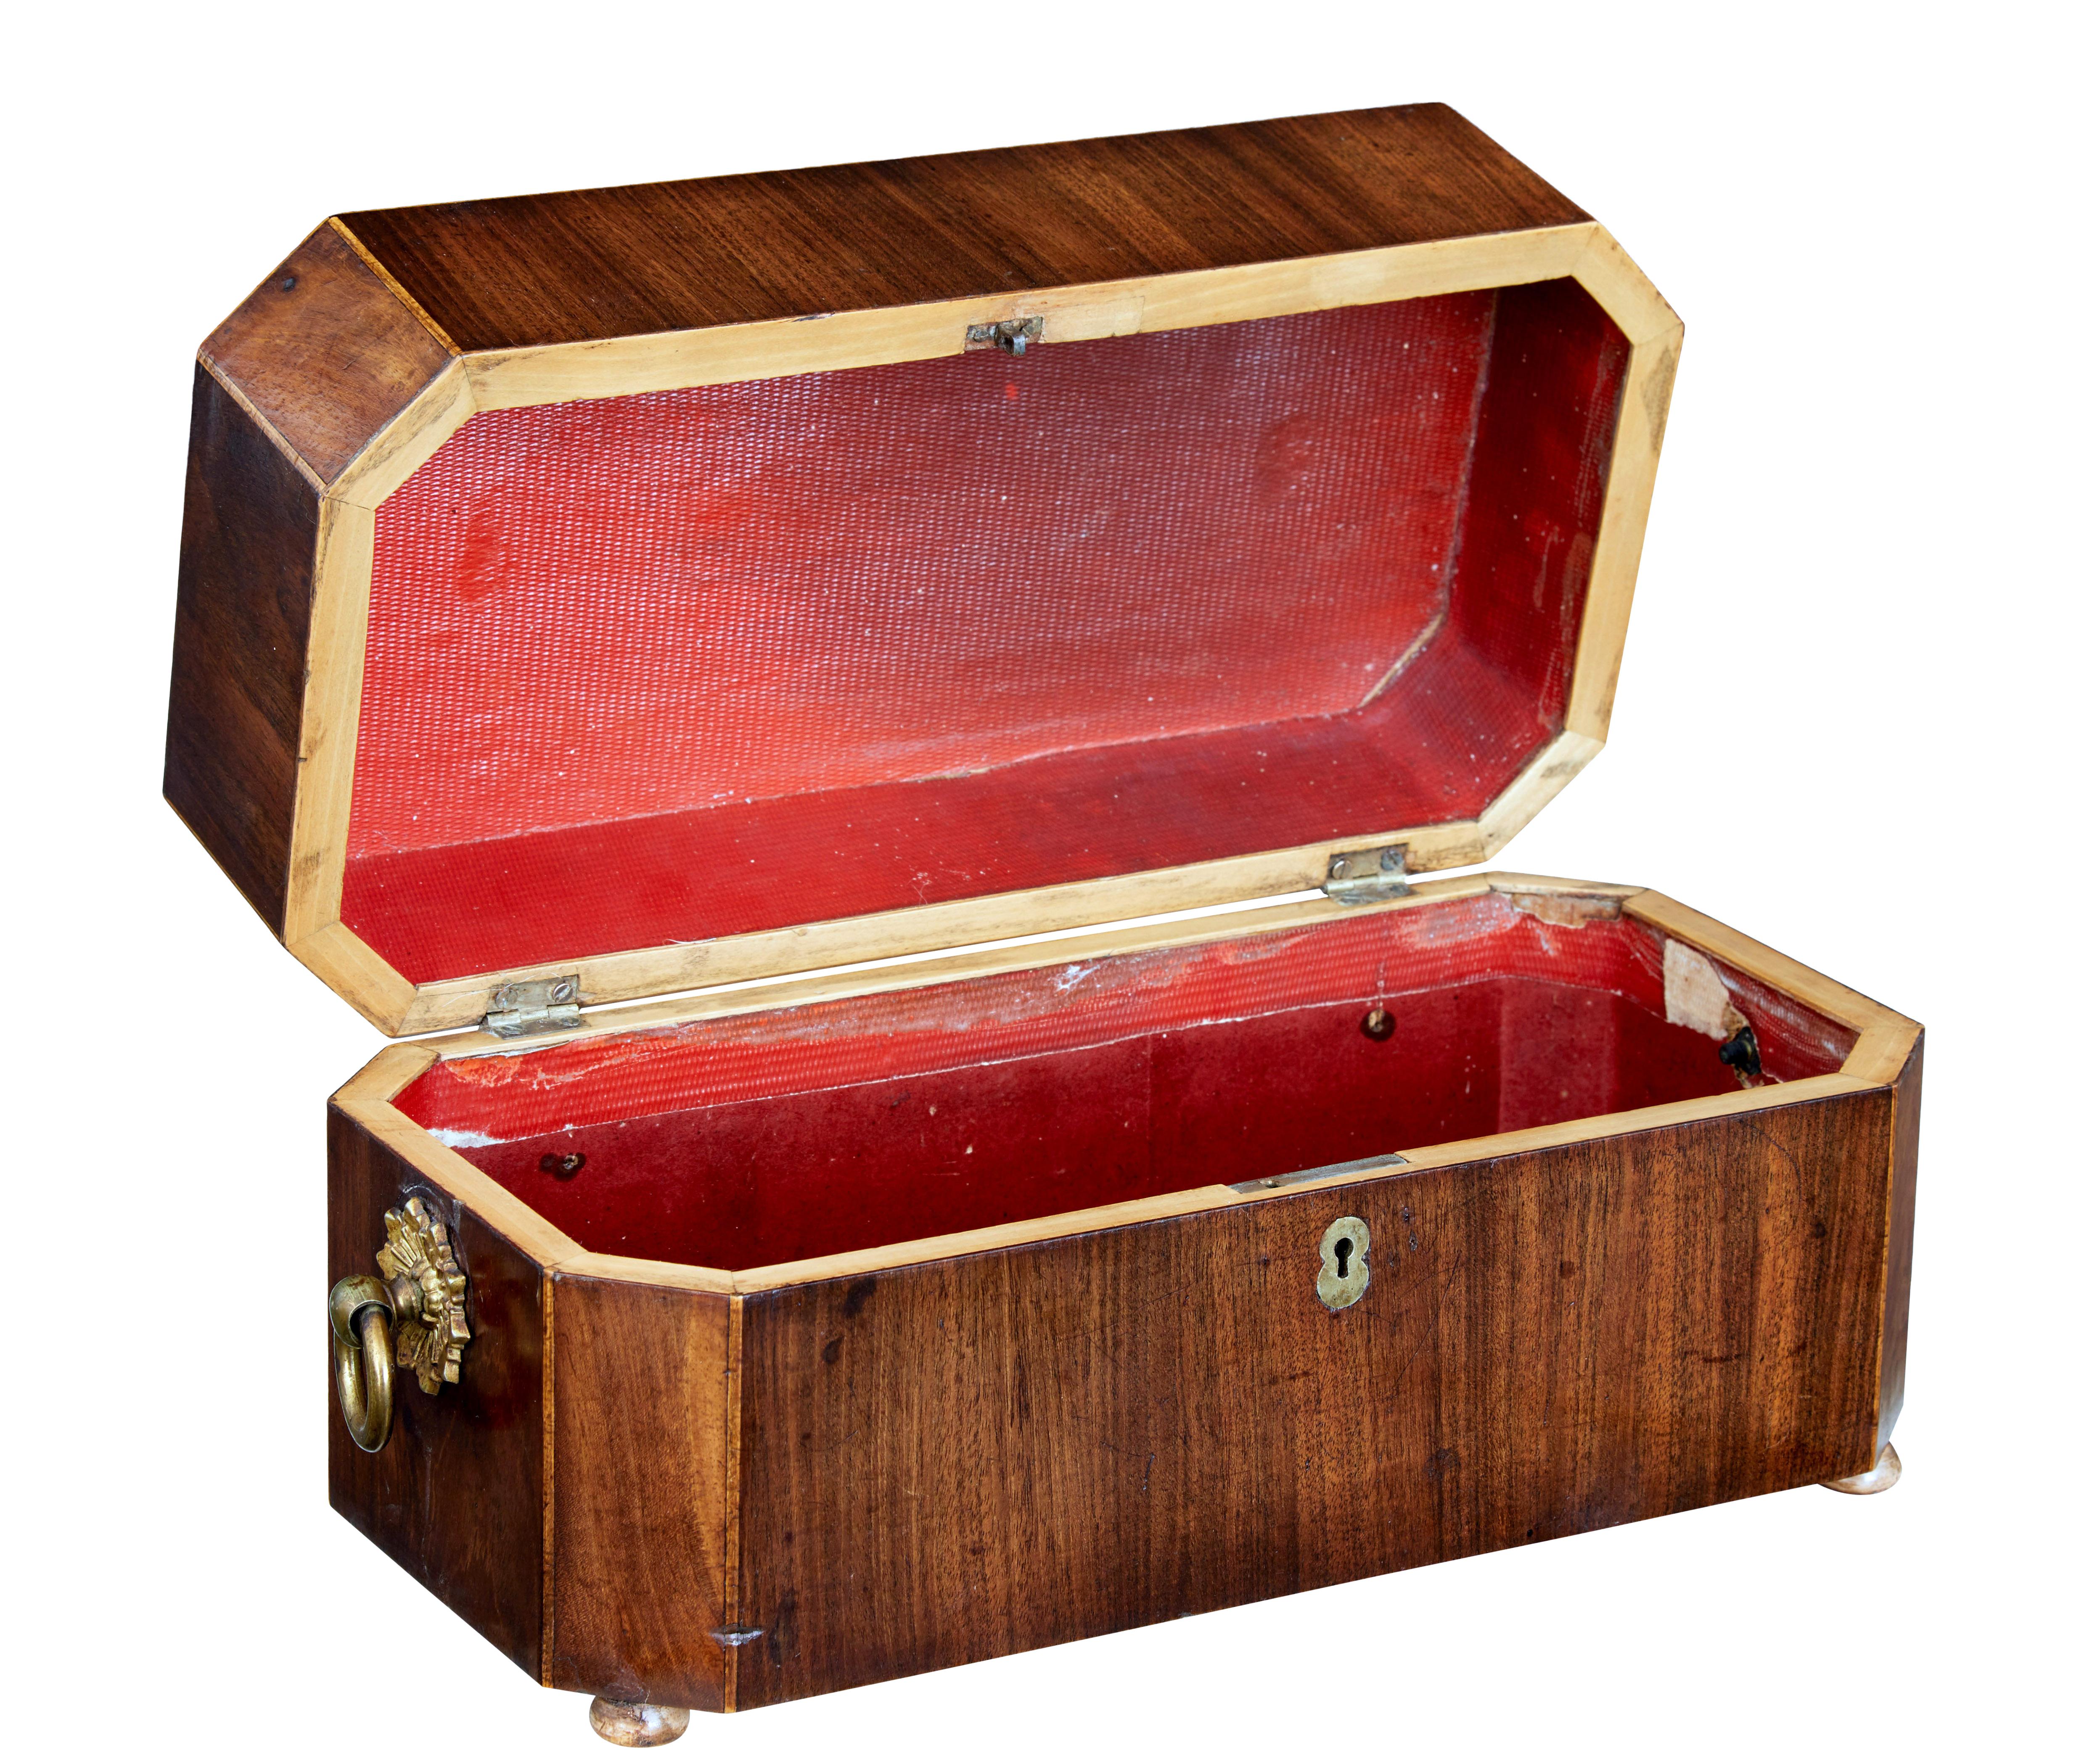 Early 19th century Regency mahogany tea caddy circa 1820.

Made using flame mahogany veneers.  Brass handles with star motif to the sides.  Canted corners strung with satinwood.  Standing on flat bun feet.

Paper lined interior with no compartments